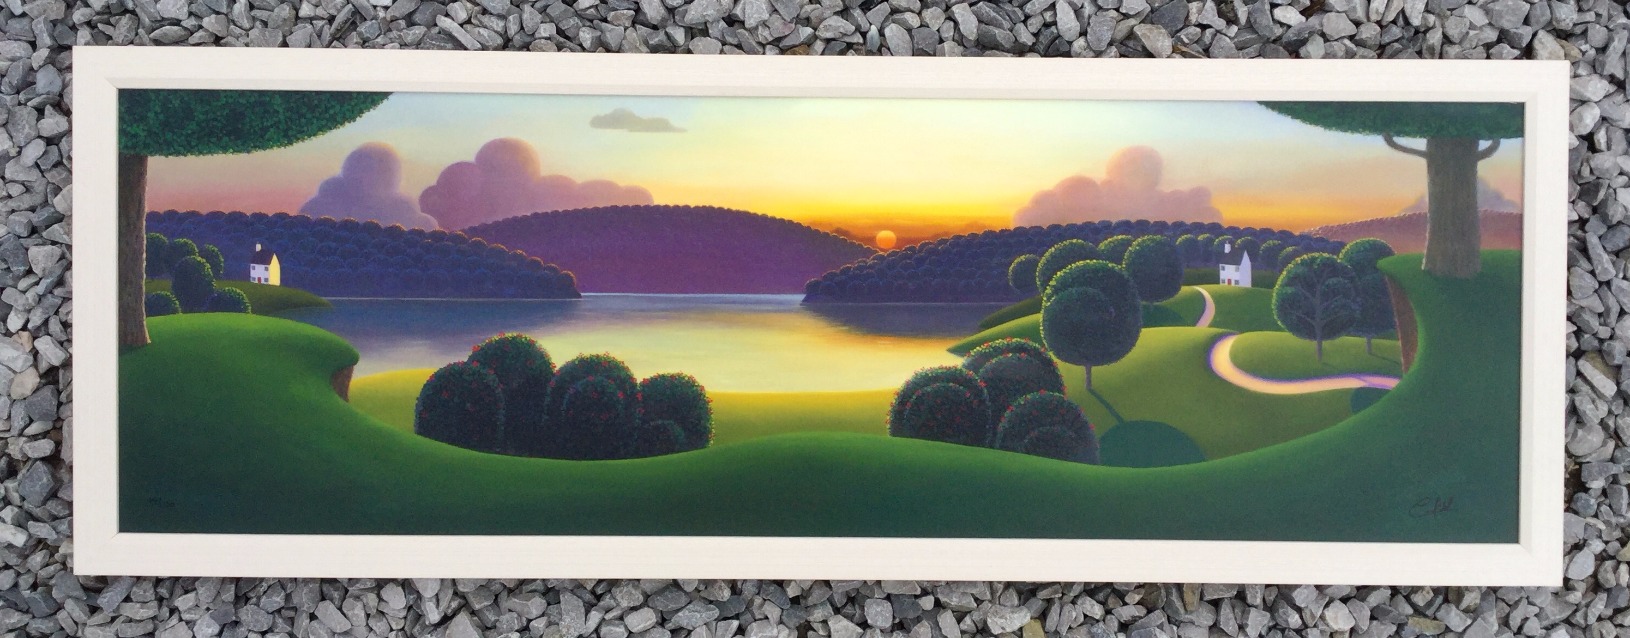 The Great Outdoors by Paul Corfield, Sea | Water | Landscape